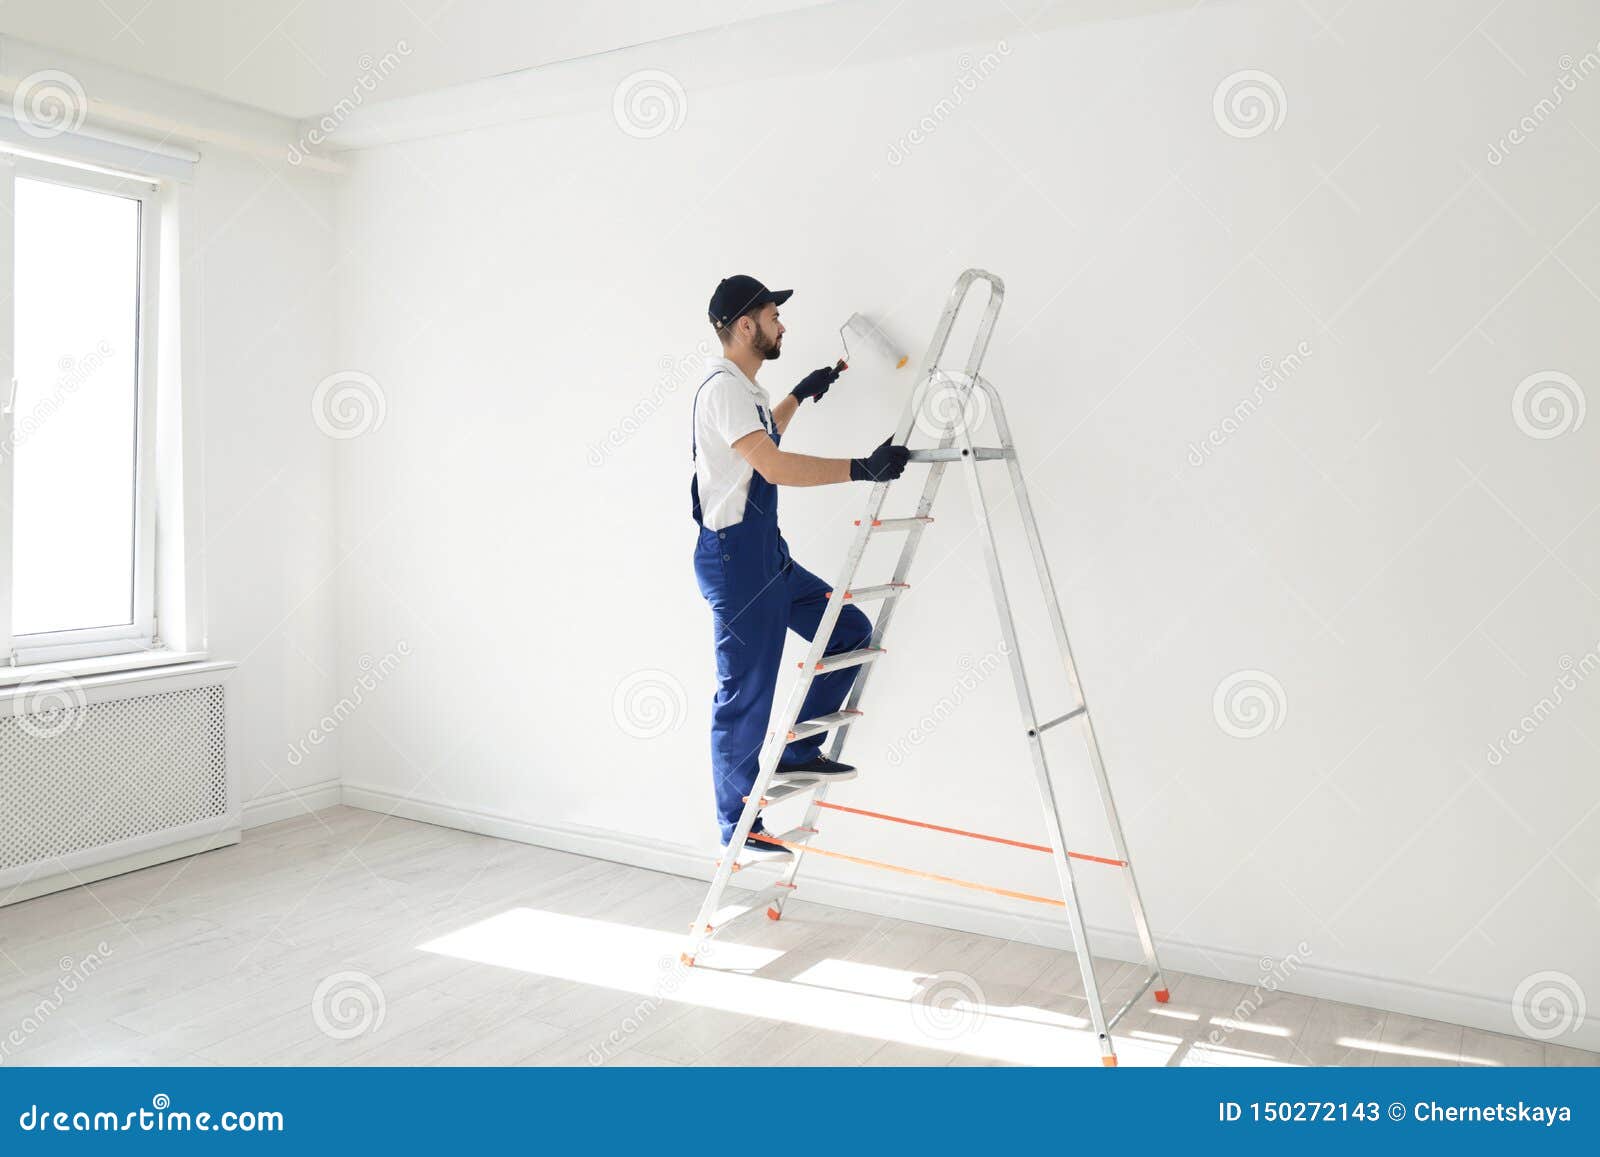 Handyman Painting Wall With Roller Brush Professional Construction Tools Stock Image Image Of Building Constructor 150272143,Queen Elizabeth Corgis Photos